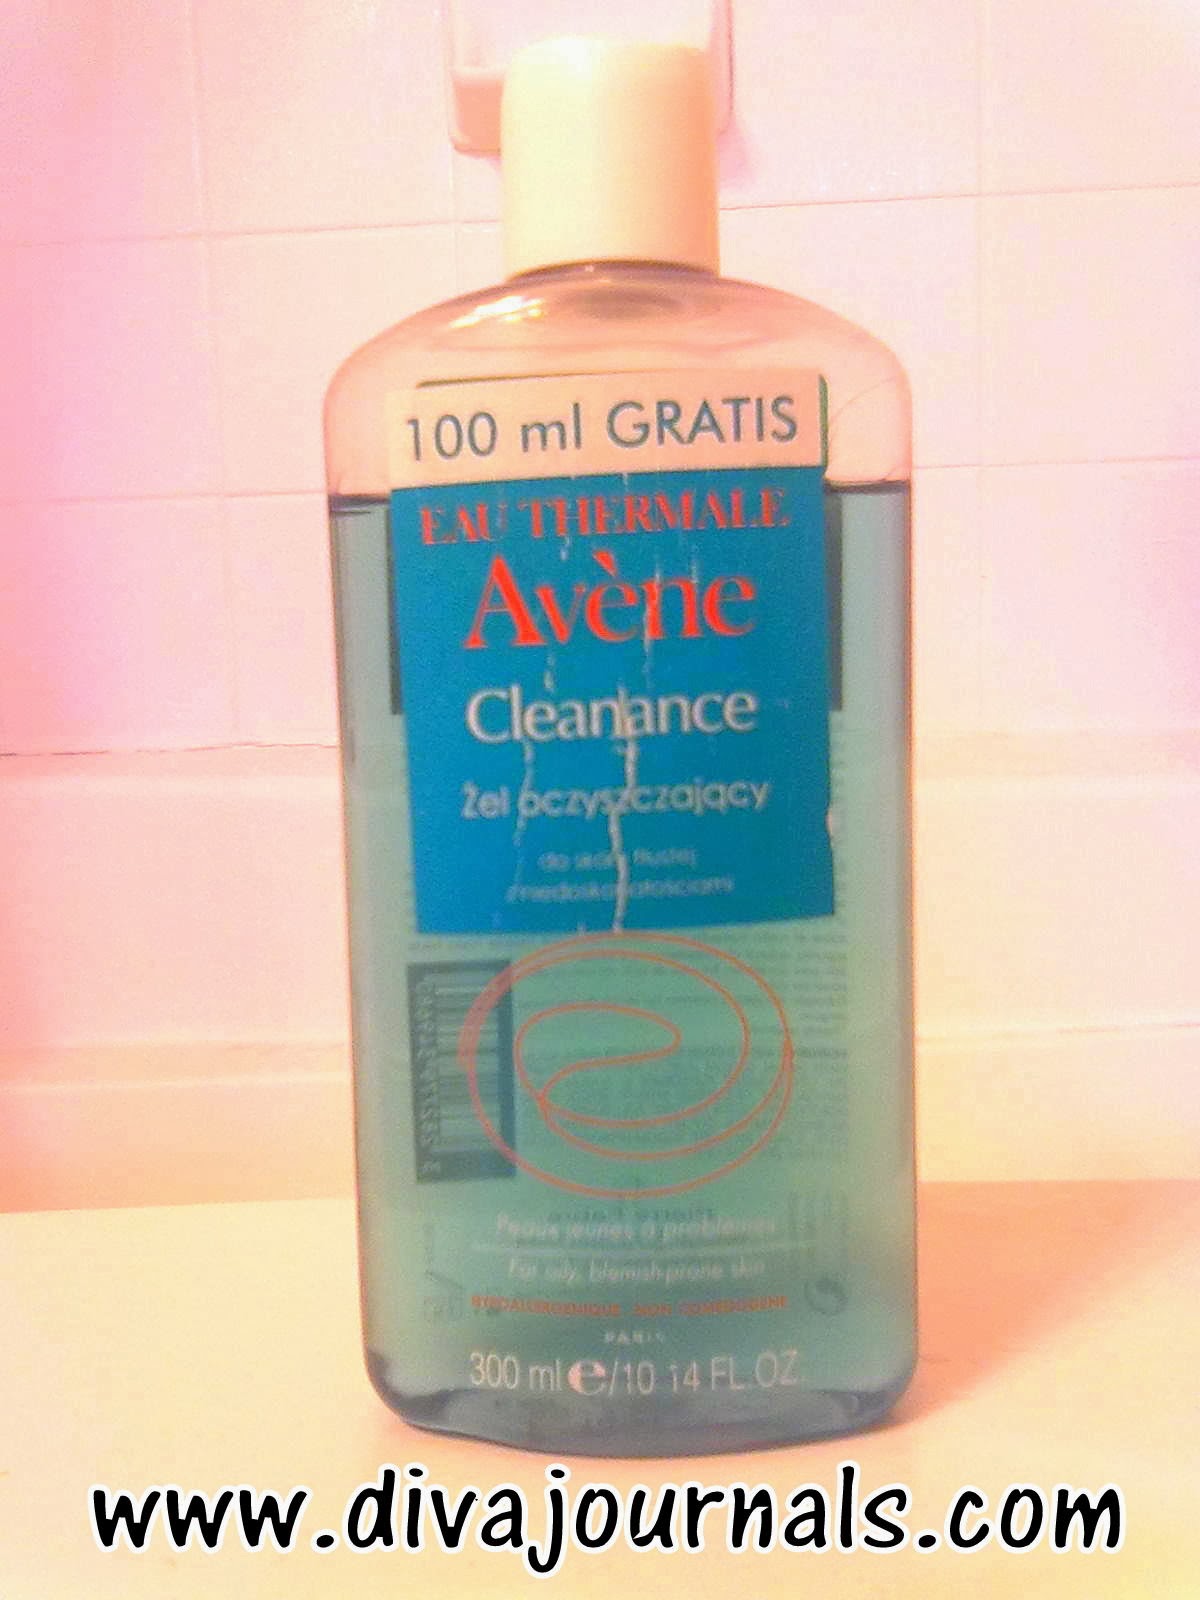 Triclenz Hair Cleanser 100 ml Price Uses Side Effects Composition   Apollo Pharmacy